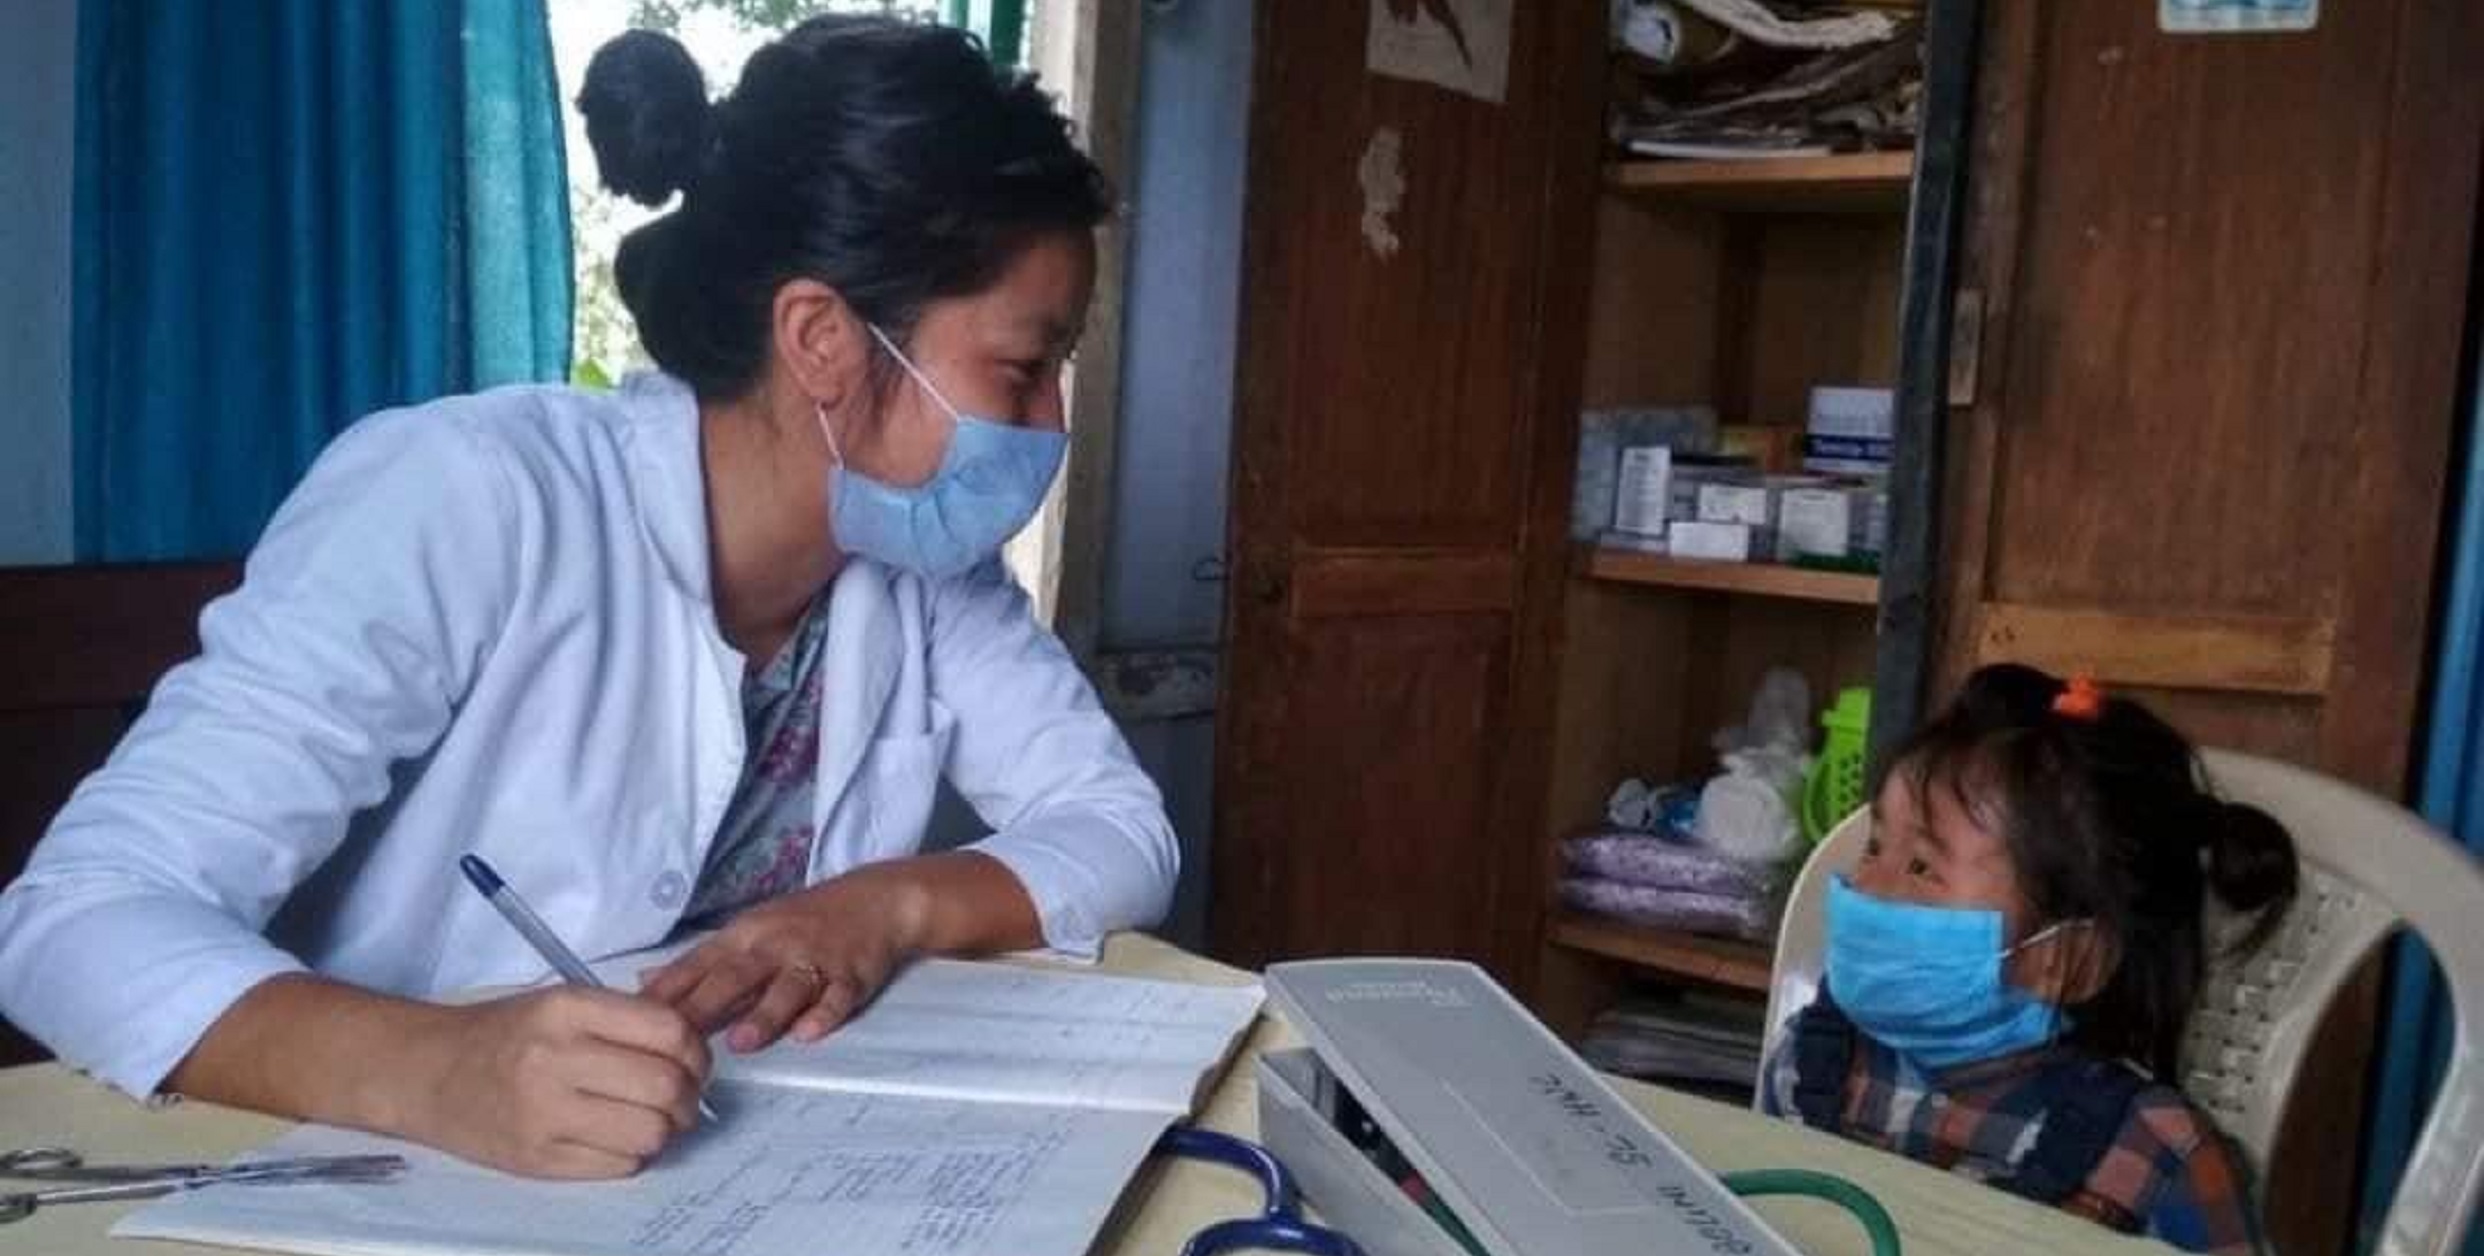 Nagaland: 3 Year Old Girl Visits Doctor On Her Own While Her Parents Were At Work